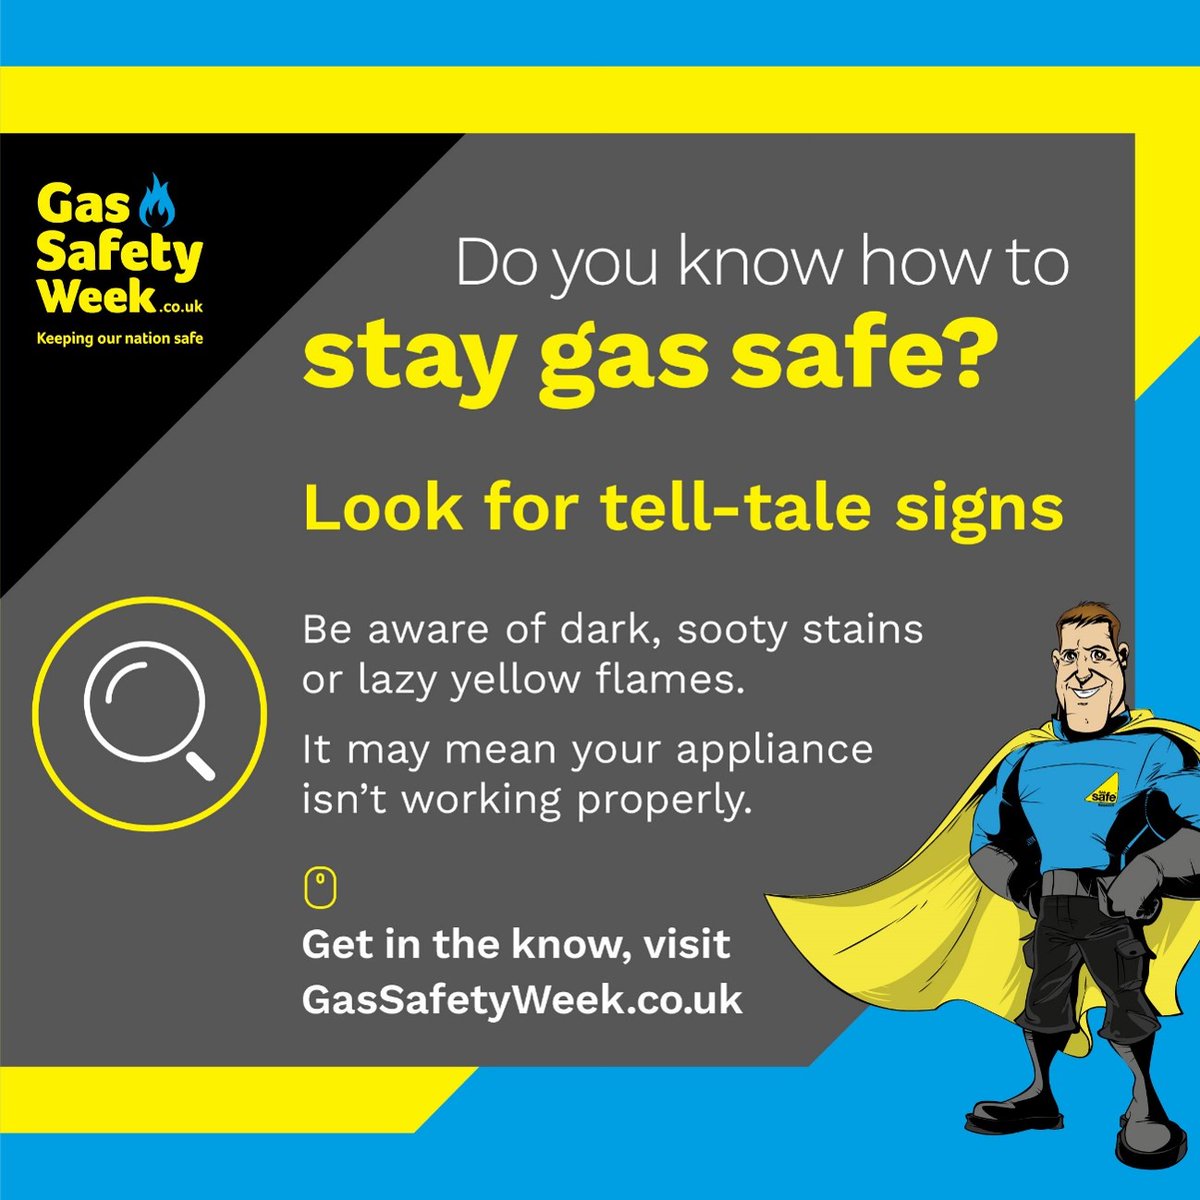 Make sure that no air vents or chimneys are blocked. Look for signs of unsafe gas appliances, such as a lazy yellow flame, boiler errors, and uncommon noises. Look out for one another and find out more on our website: wolverhamptonhomes.org.uk/gsw23/ #GSW23 #GasSafetyWeek